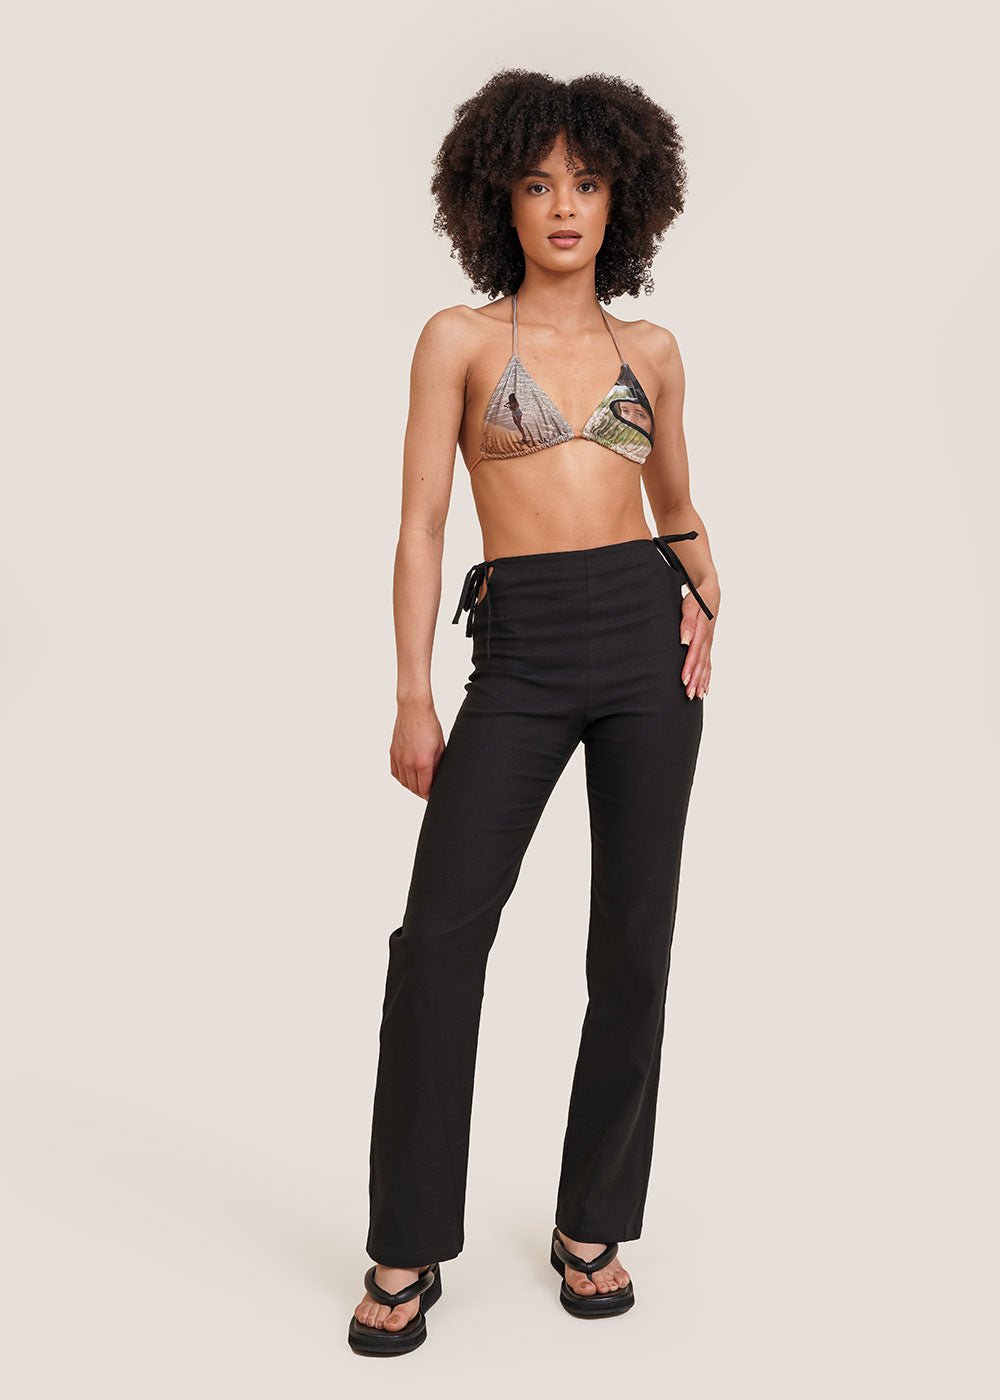 Paloma Wool Black Scurry Pants - New Classics Studios Sustainable Ethical Fashion Canada